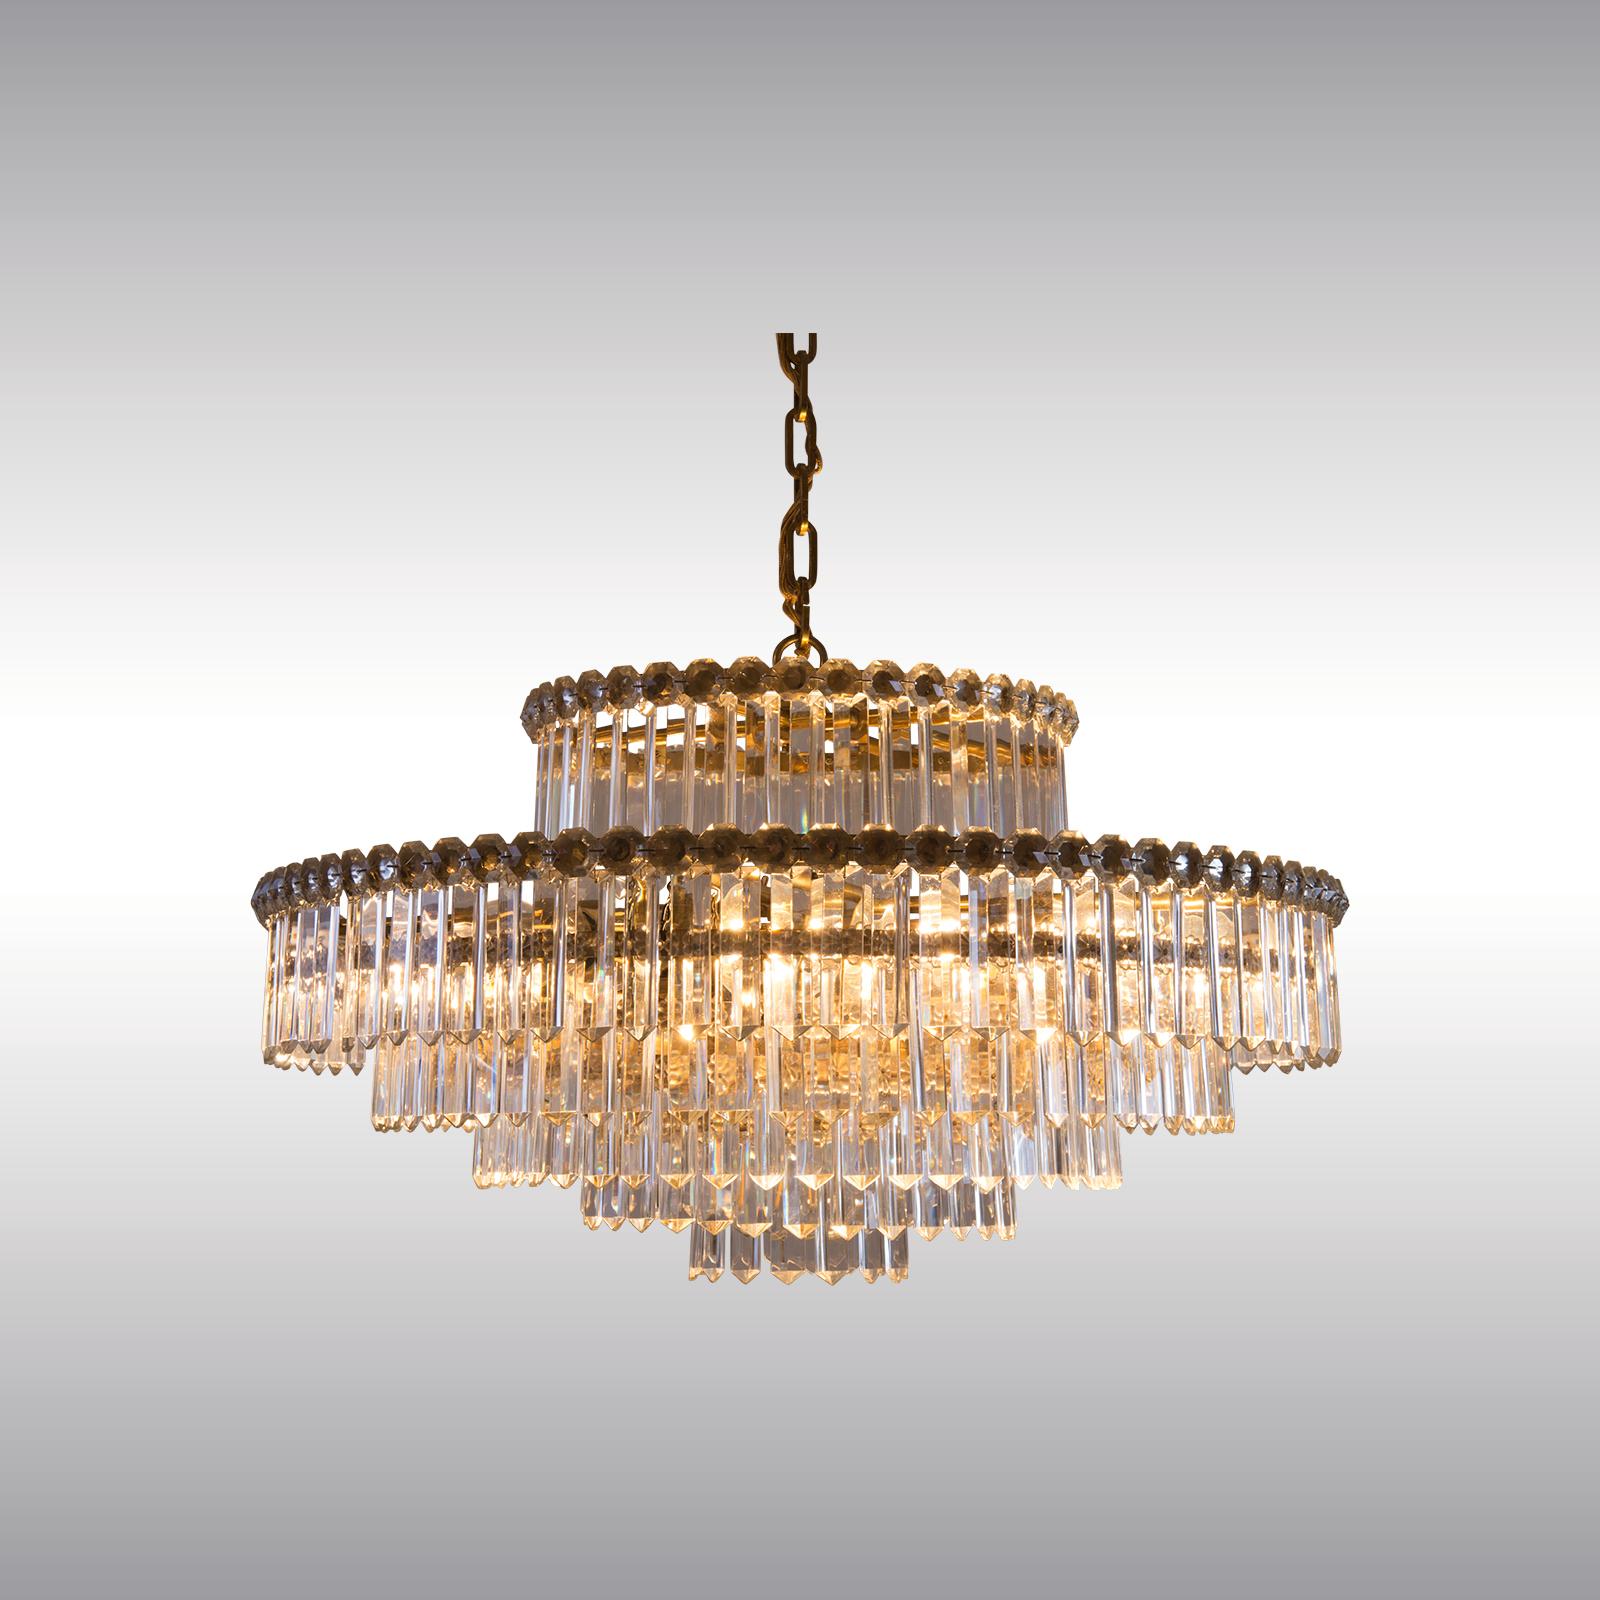 the height indicated is just the chandelier - plus chain
Length:
on order
Weight:
15 kg (33.07 lbs)
Sockets:
8x max. 8W Edison Screw Sockets E27 (E26 USA) for incandescent and self-ballasted LED lamps